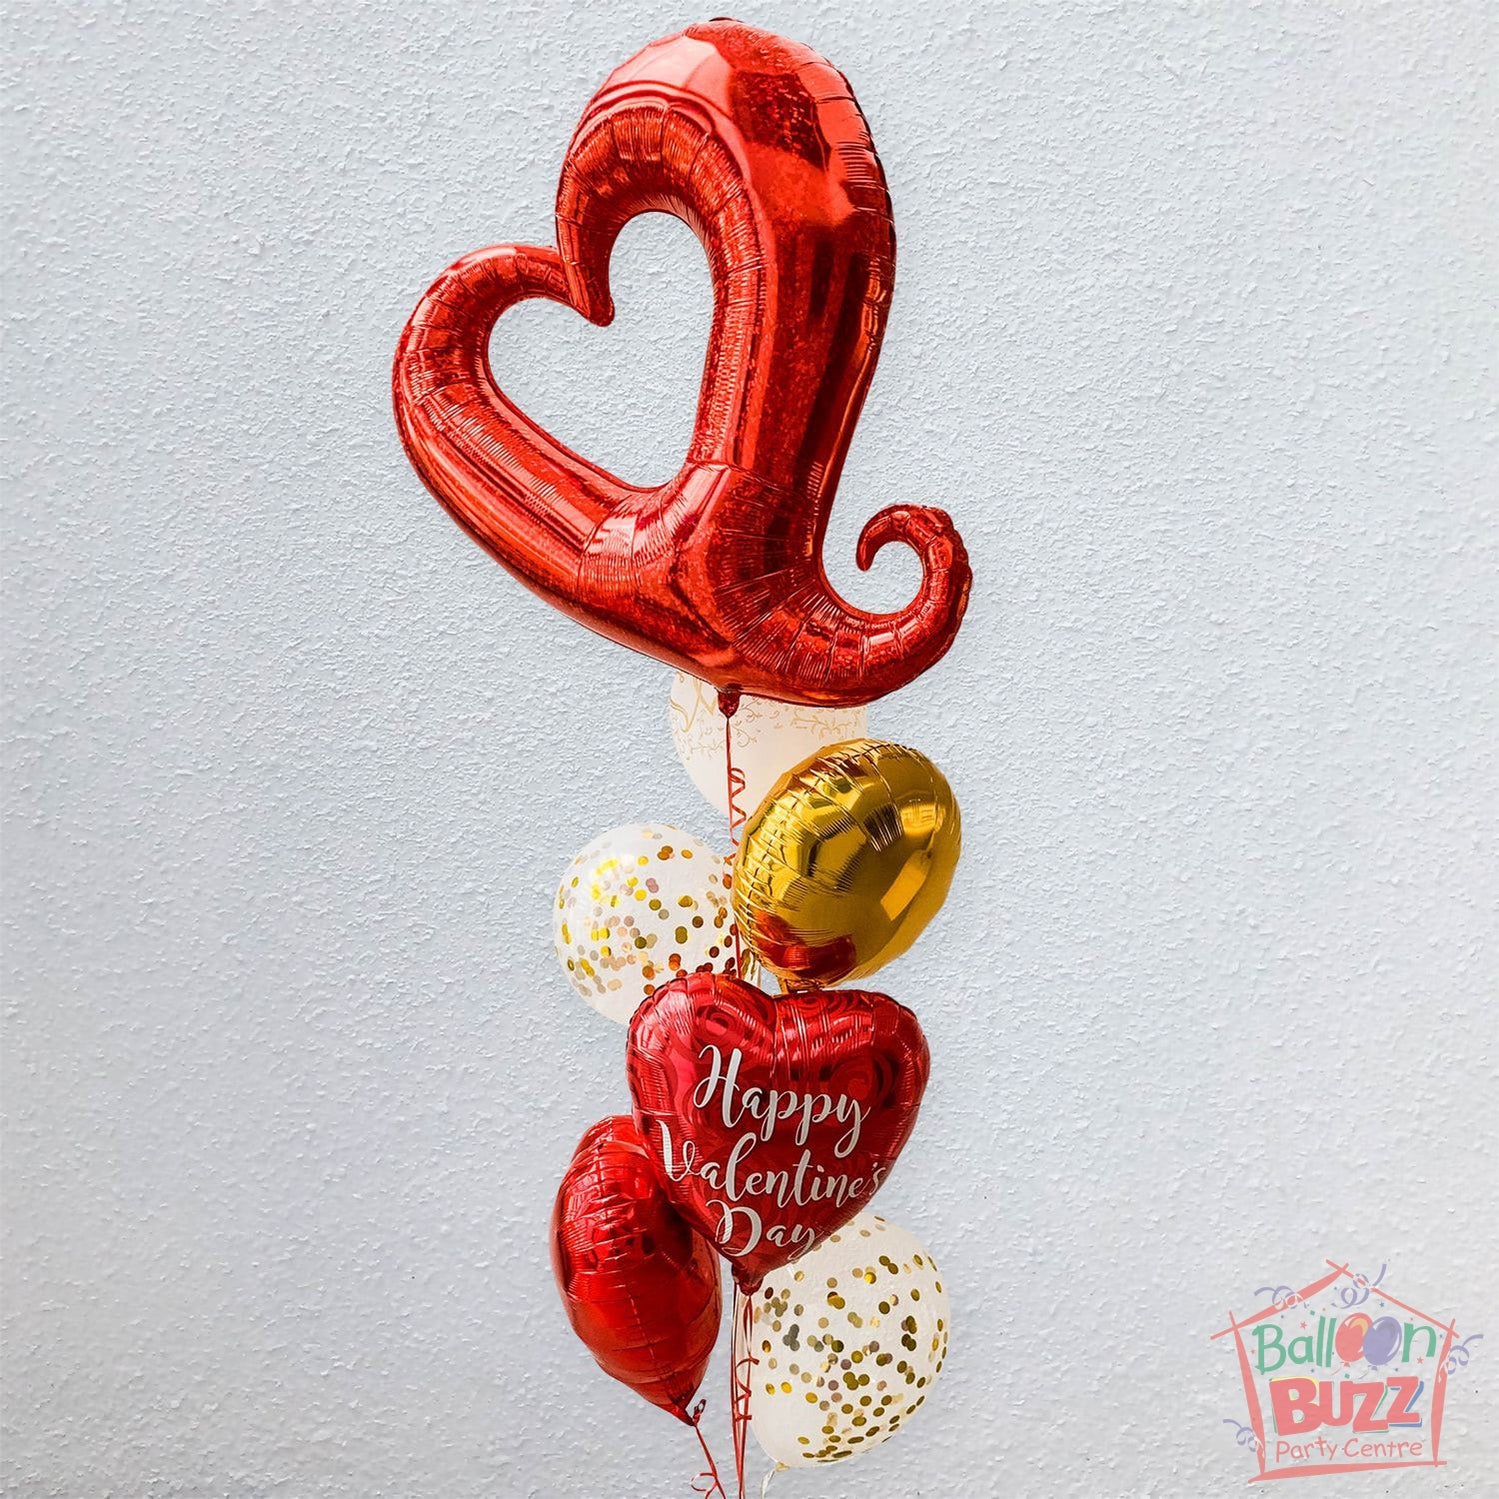 37-inch Chain of Hearts Balloon Bouquet